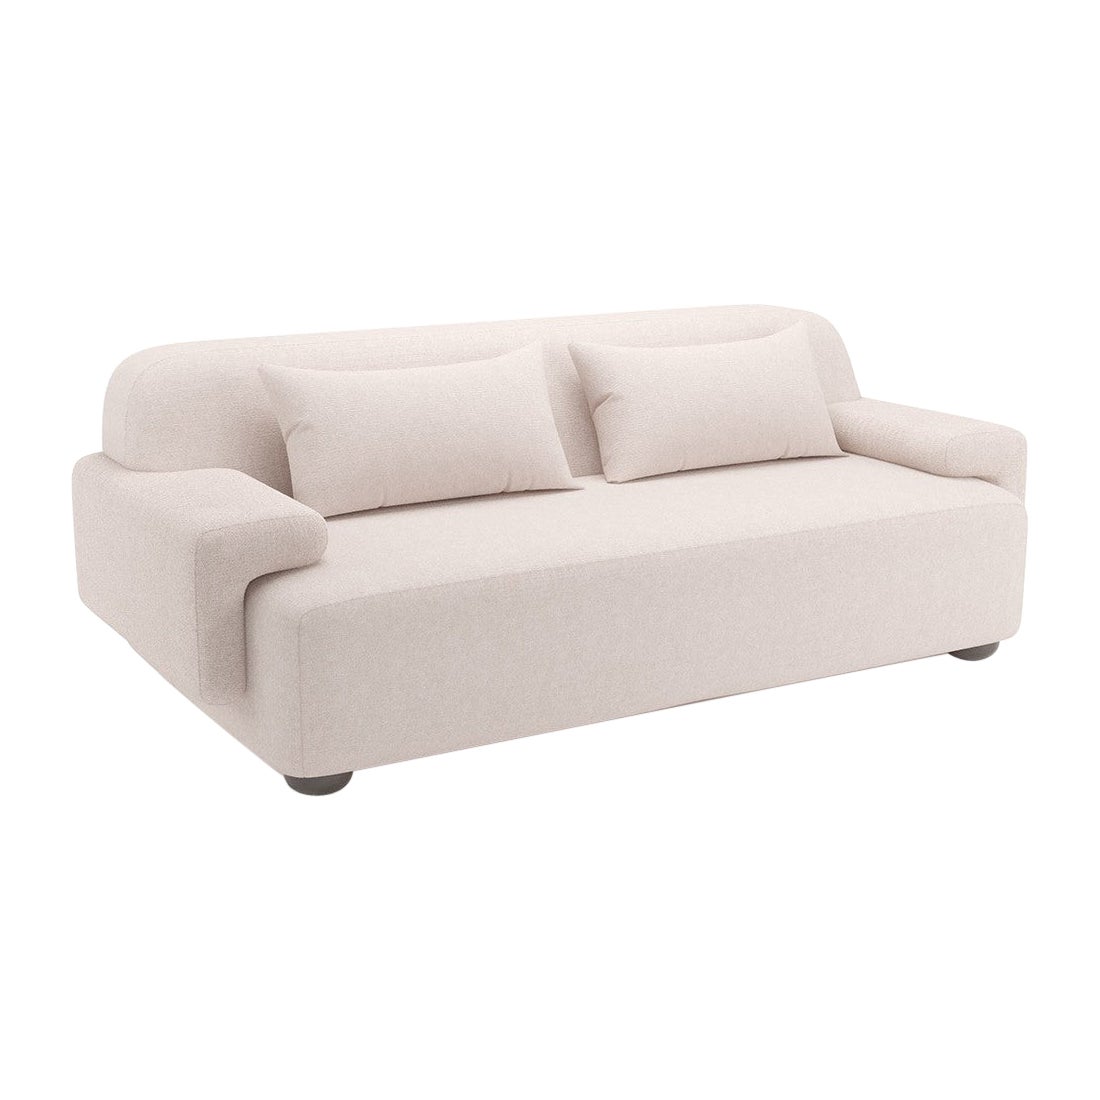 Popus Editions Lena 2.5 Seater Sofa in Natural Cork Linen Upholstery